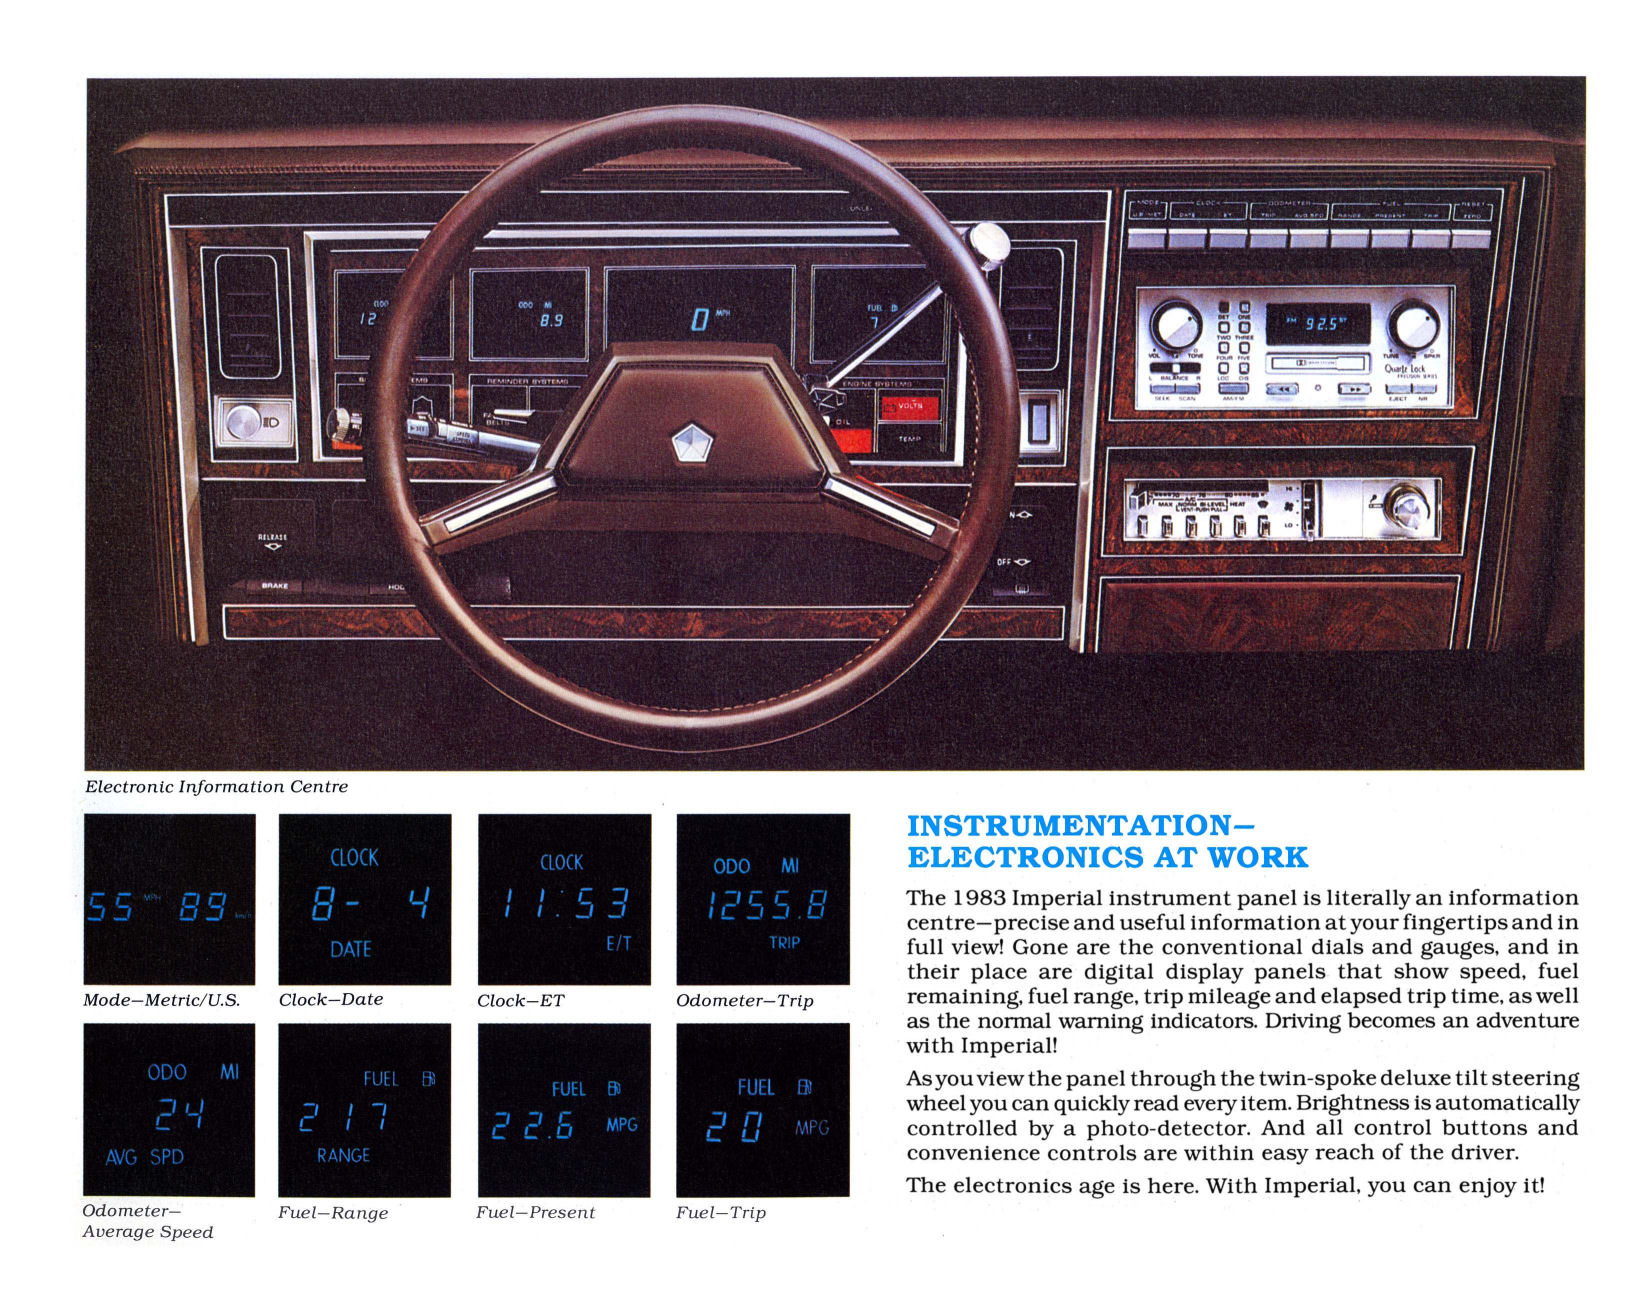 1983 Chrysler Imperial Canadian Brochure Page 7